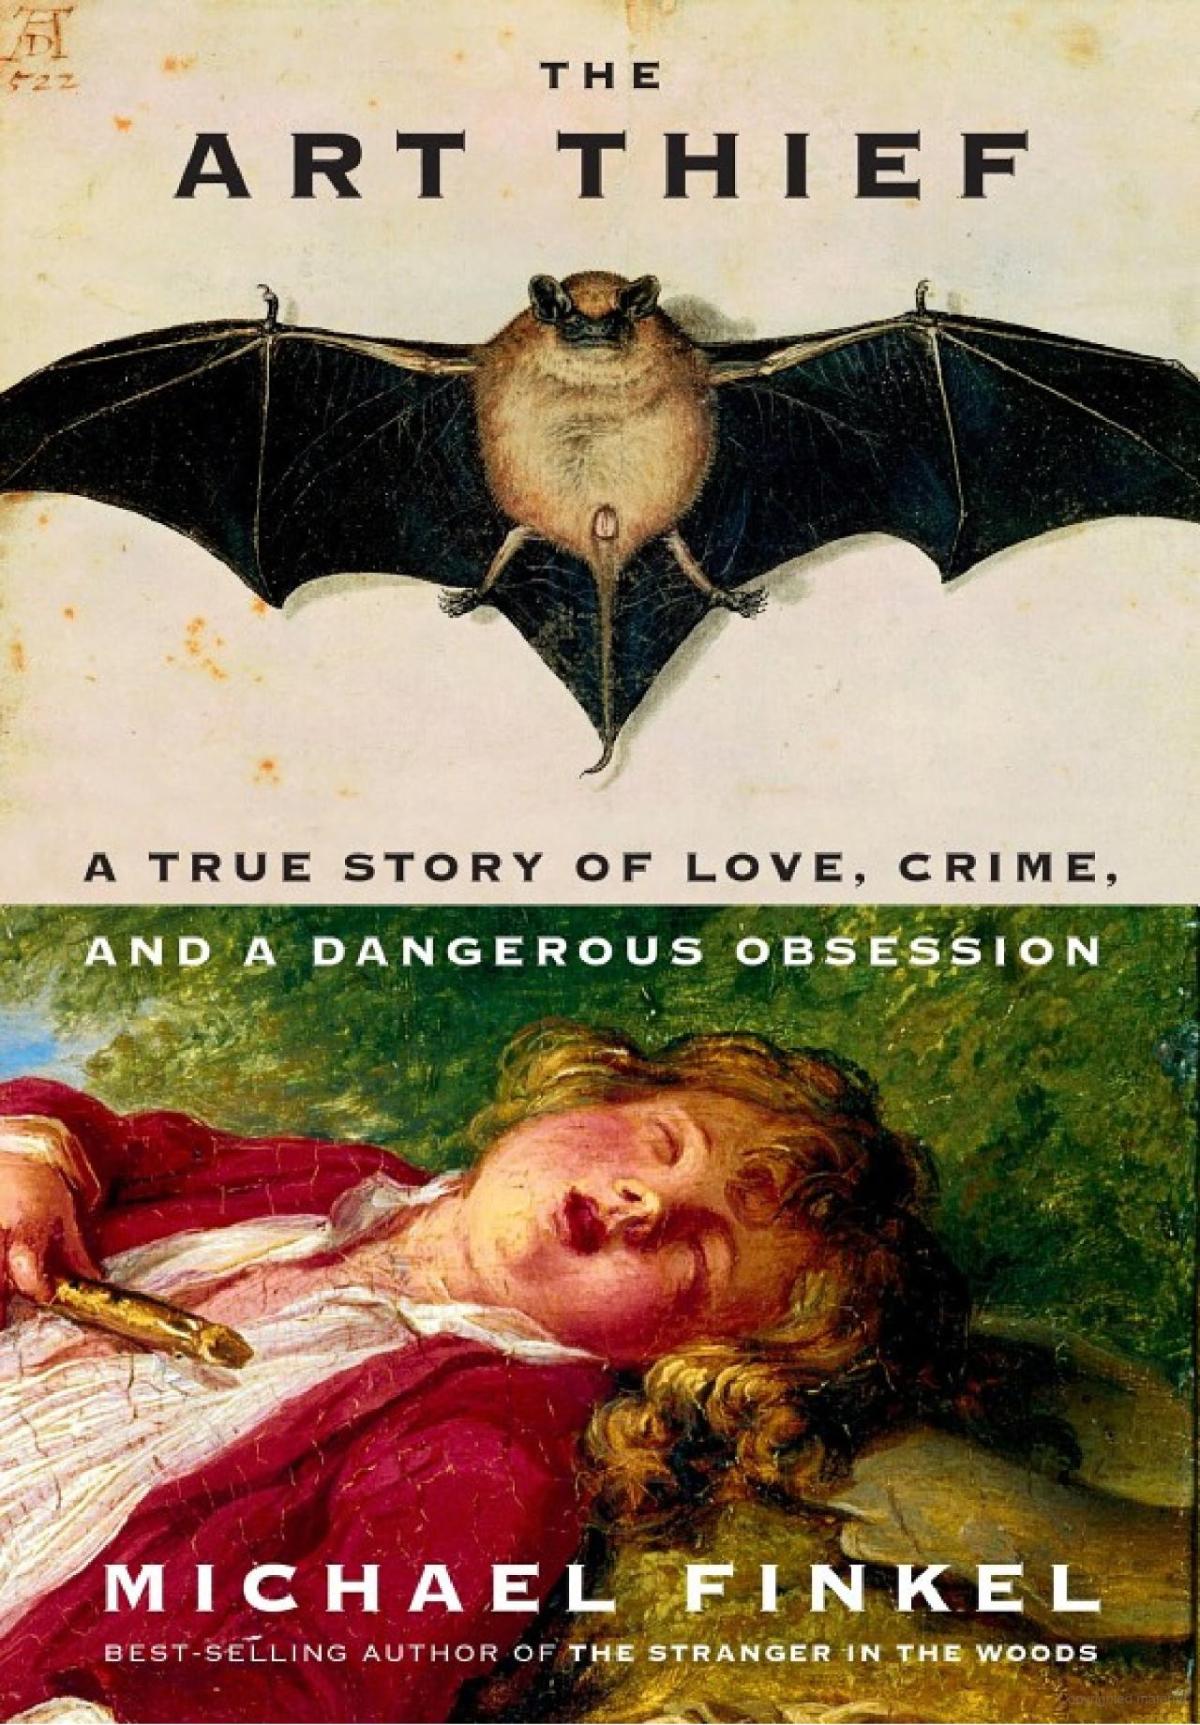 Image of the book cover featuring a painted picture of a bat and on the bottom half a person laying in the grass. 